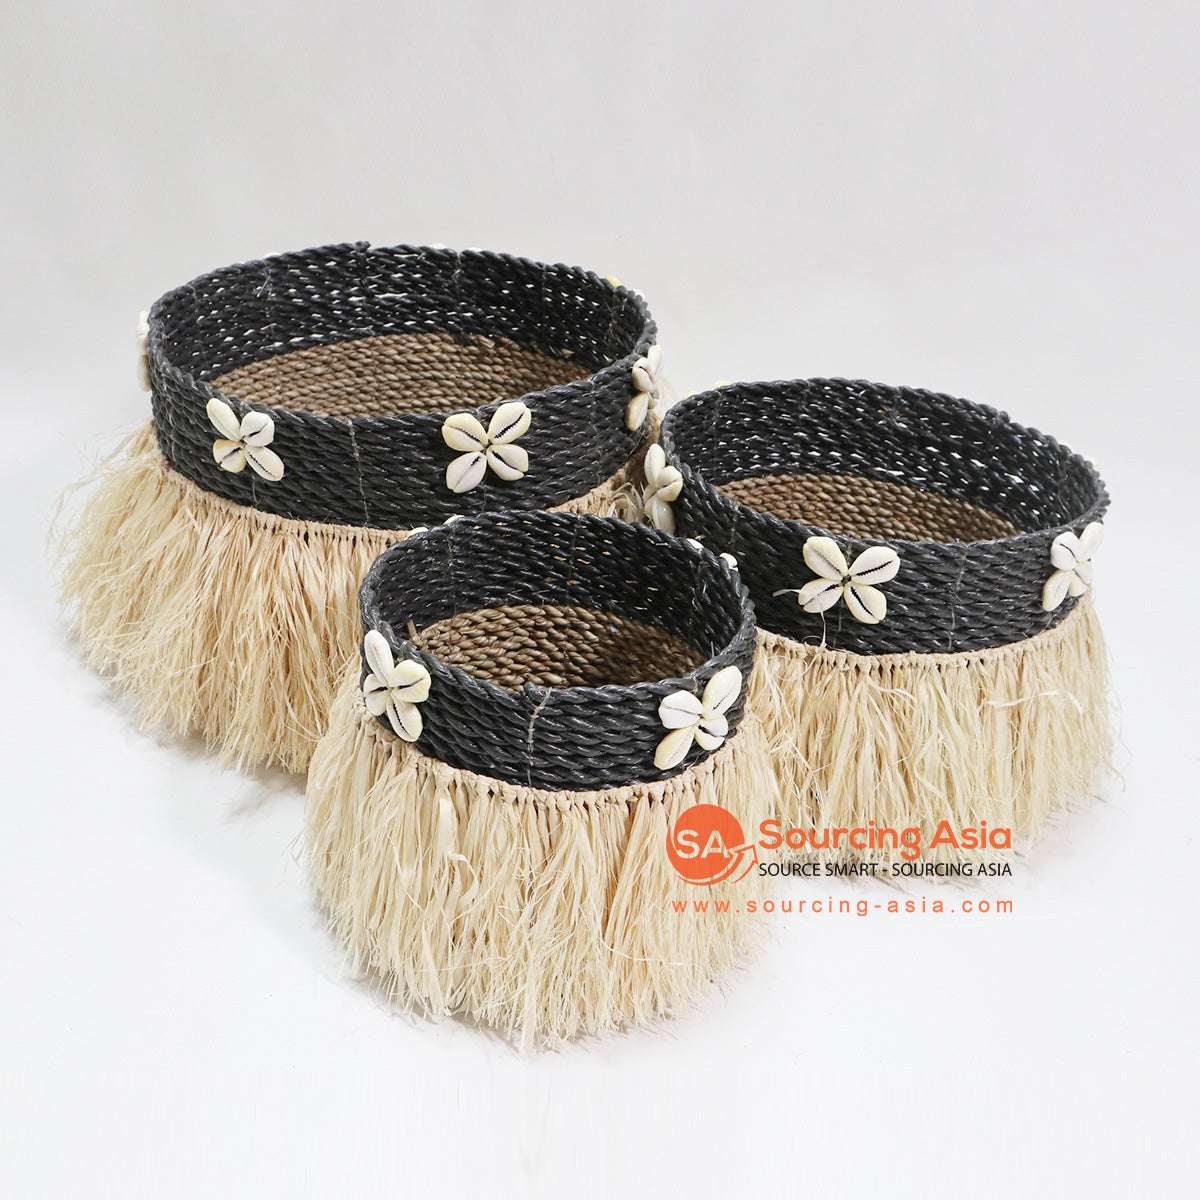 HBSC054 SET OF THREE BLACK SEAGRASS BASKETS WITH RAFFIA FRINGE AND SHELL DECORATION